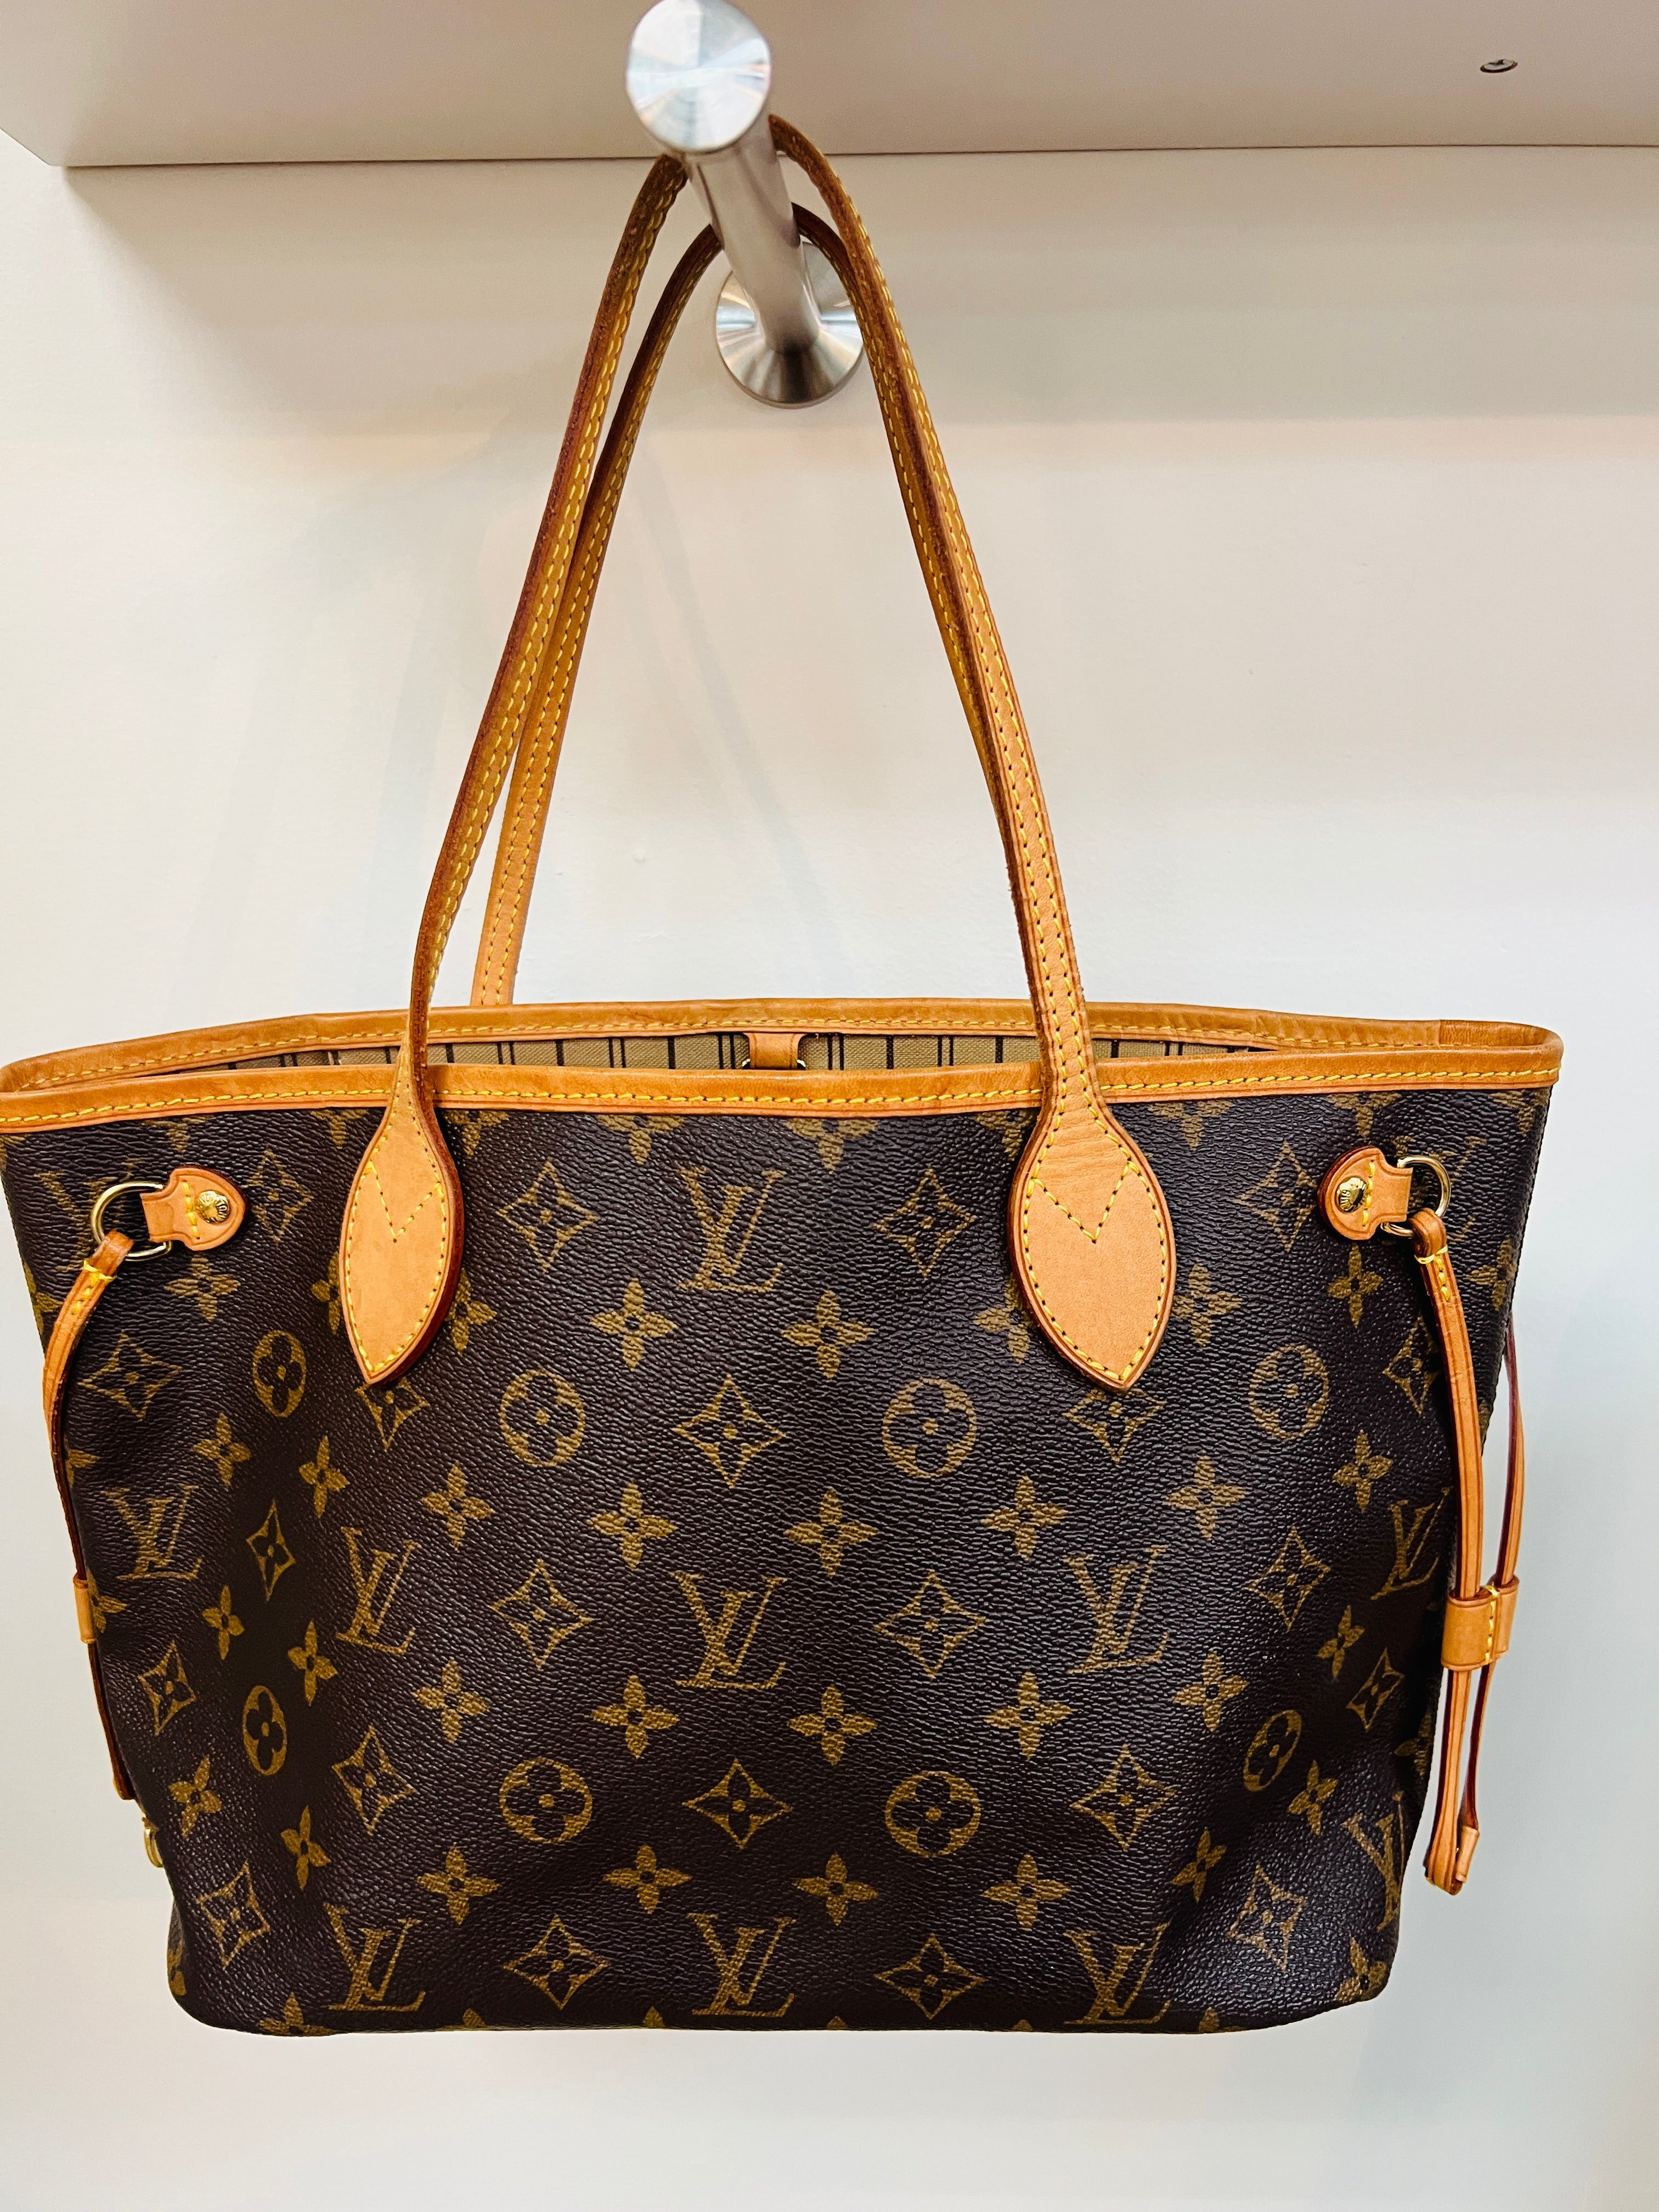 Authentic Louis Vuitton Neverfull Pm With Receipt for Sale in